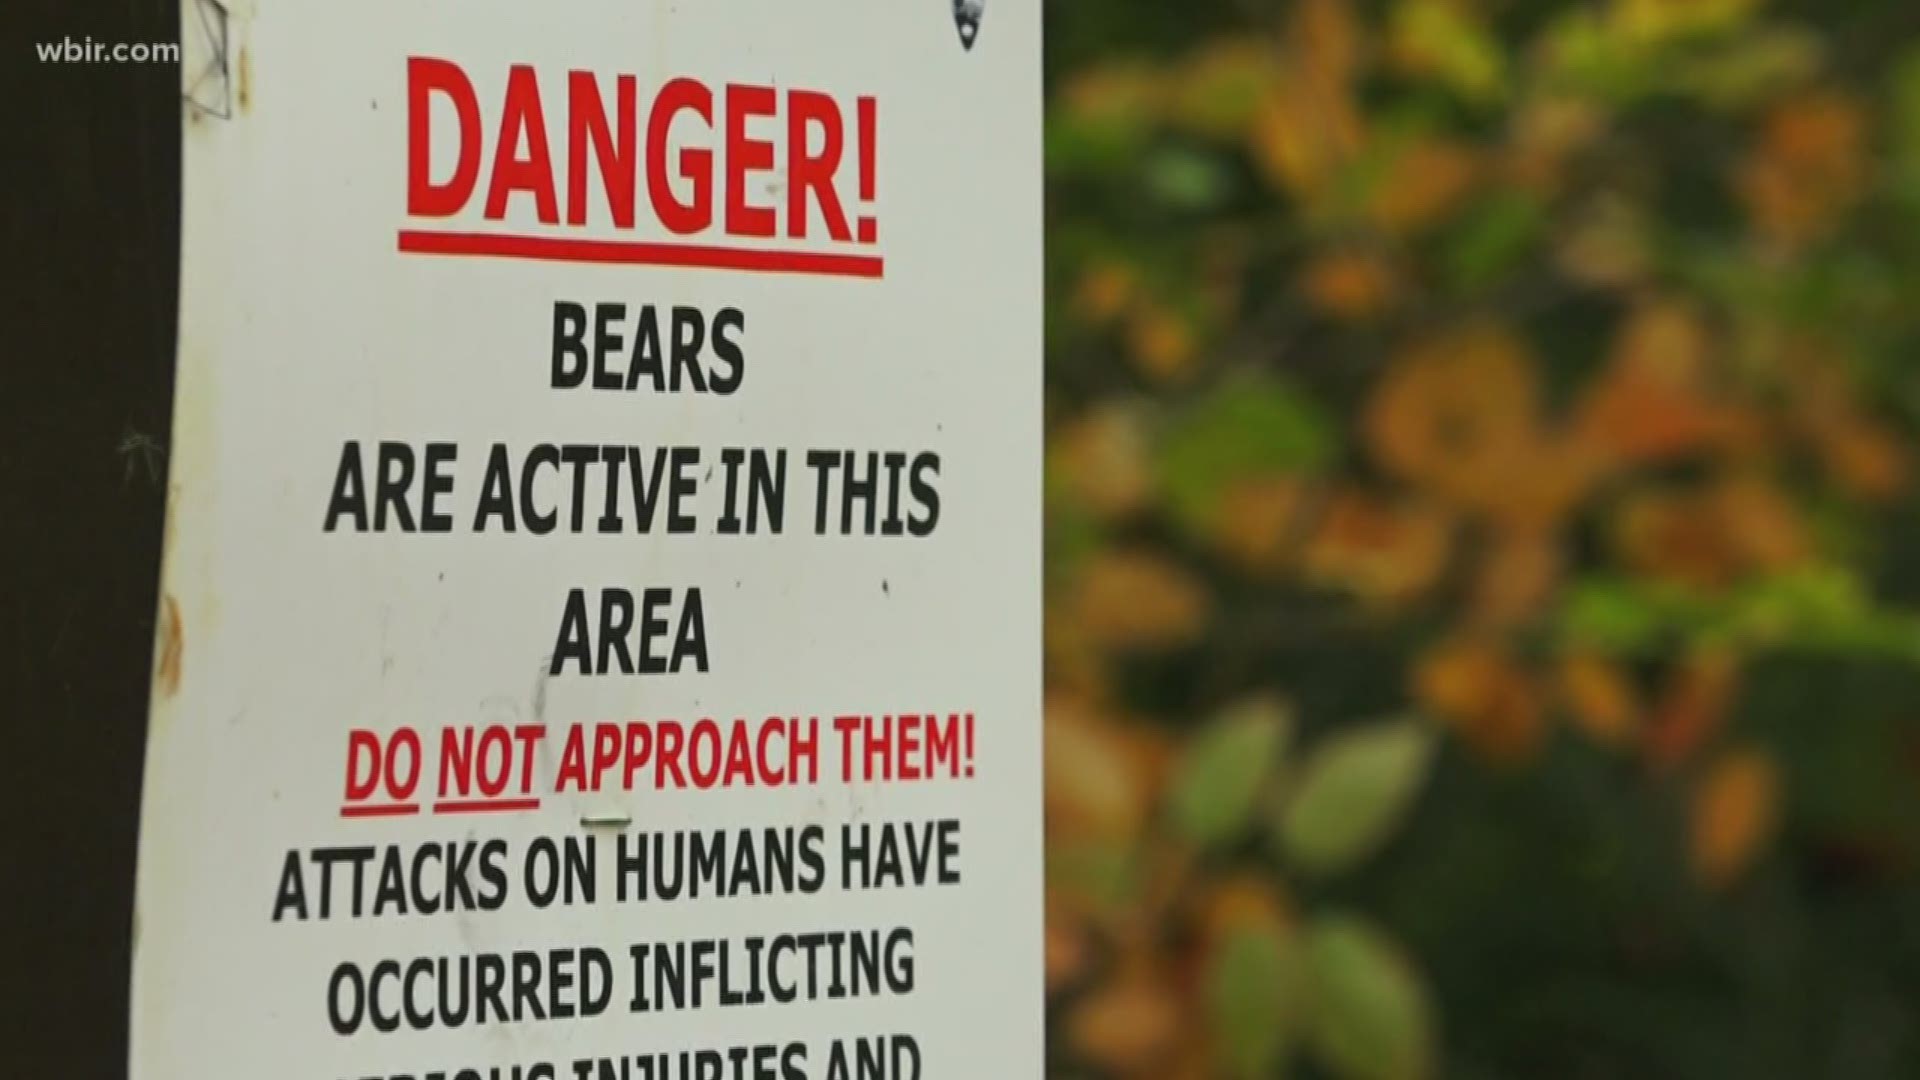 Aggressive bear behavior has closed down a shelter in the Great Smoky Mountains National Park.